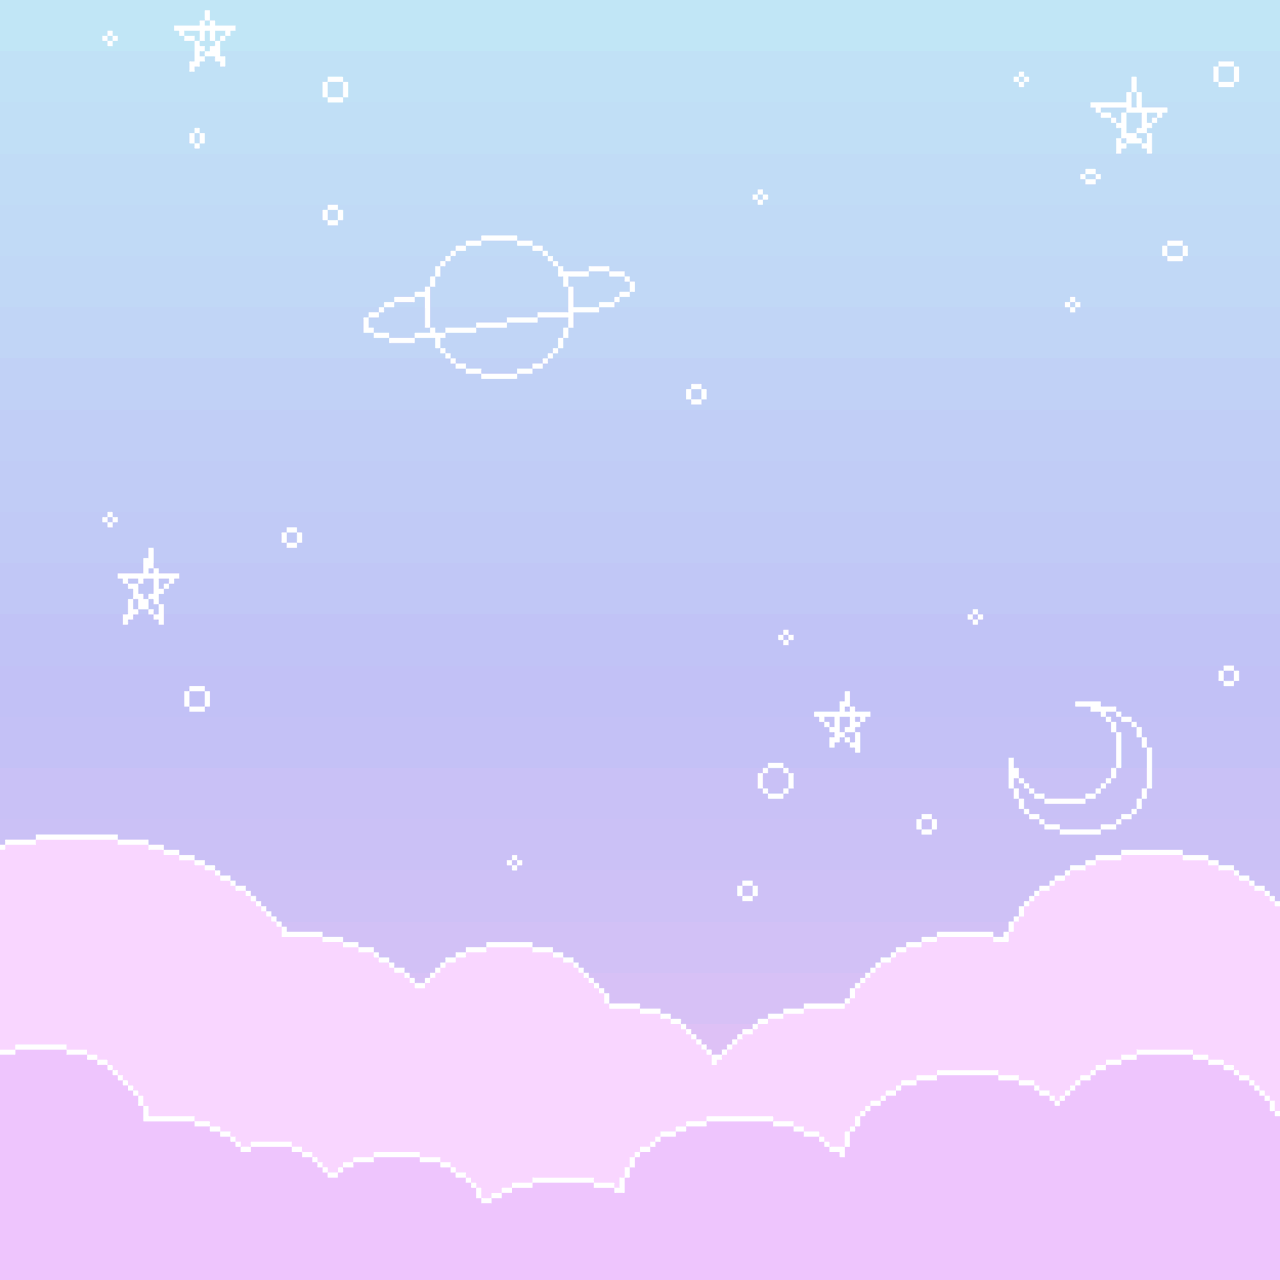 A pastel gradient background with a pixelated space scene - Doodles